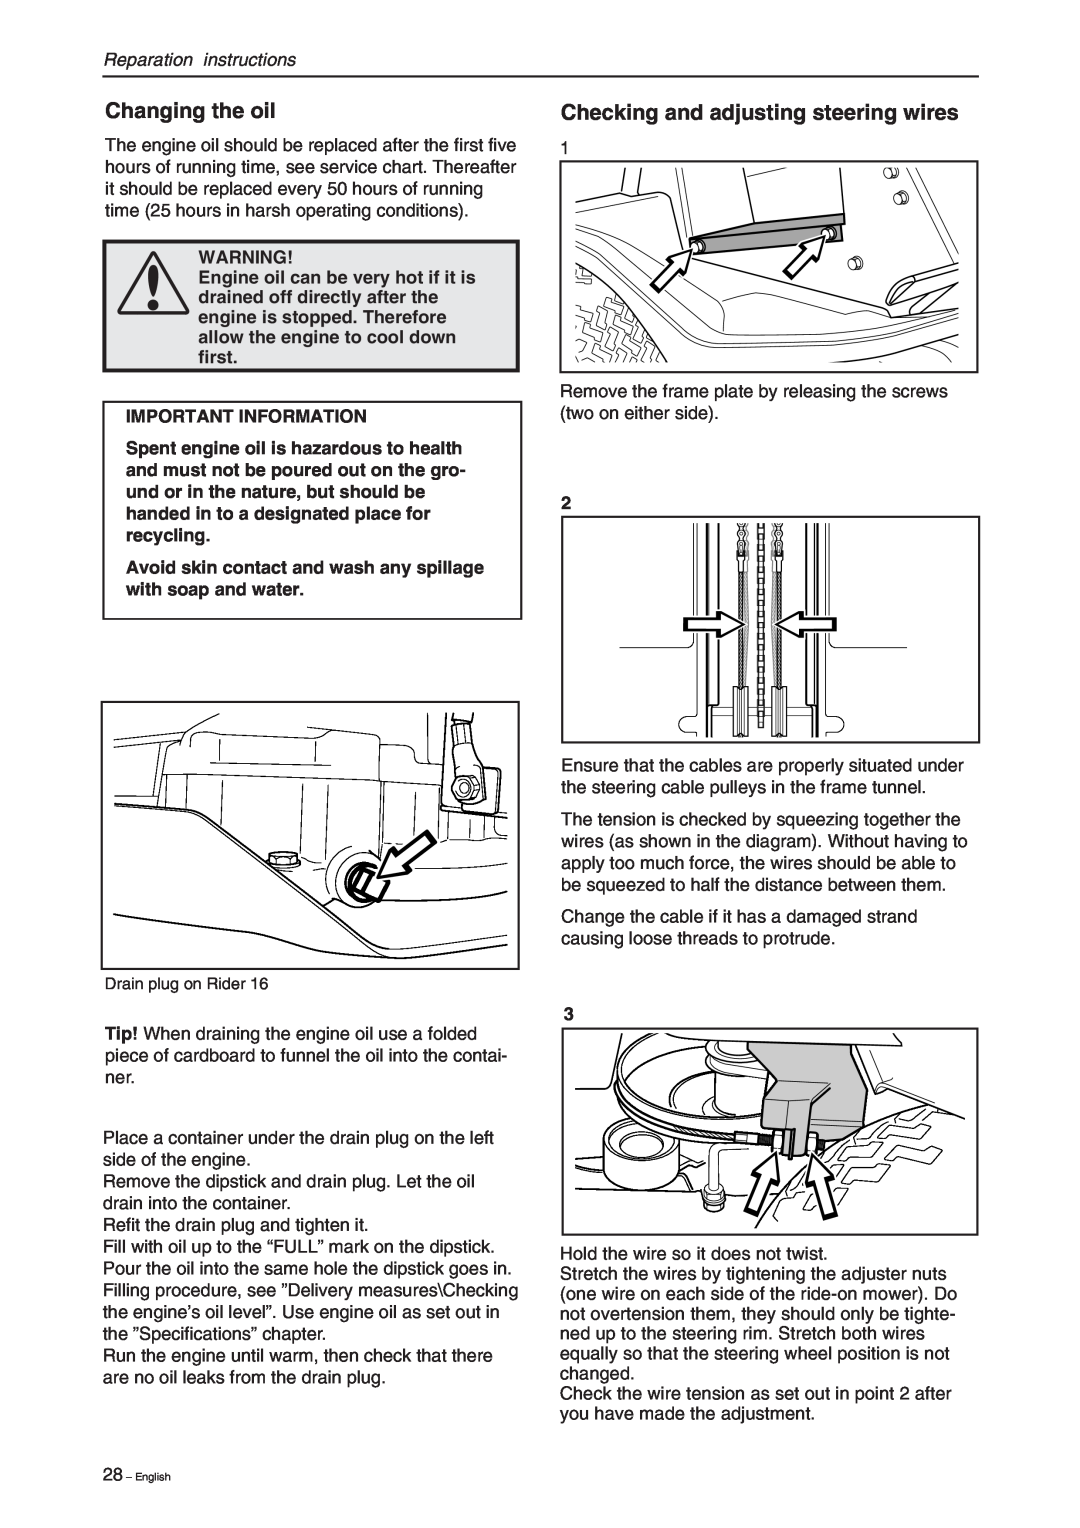 Briggs & Stratton RIDER 11 BIO manual Changing the oil, Checking and adjusting steering wires, Reparation instructions 